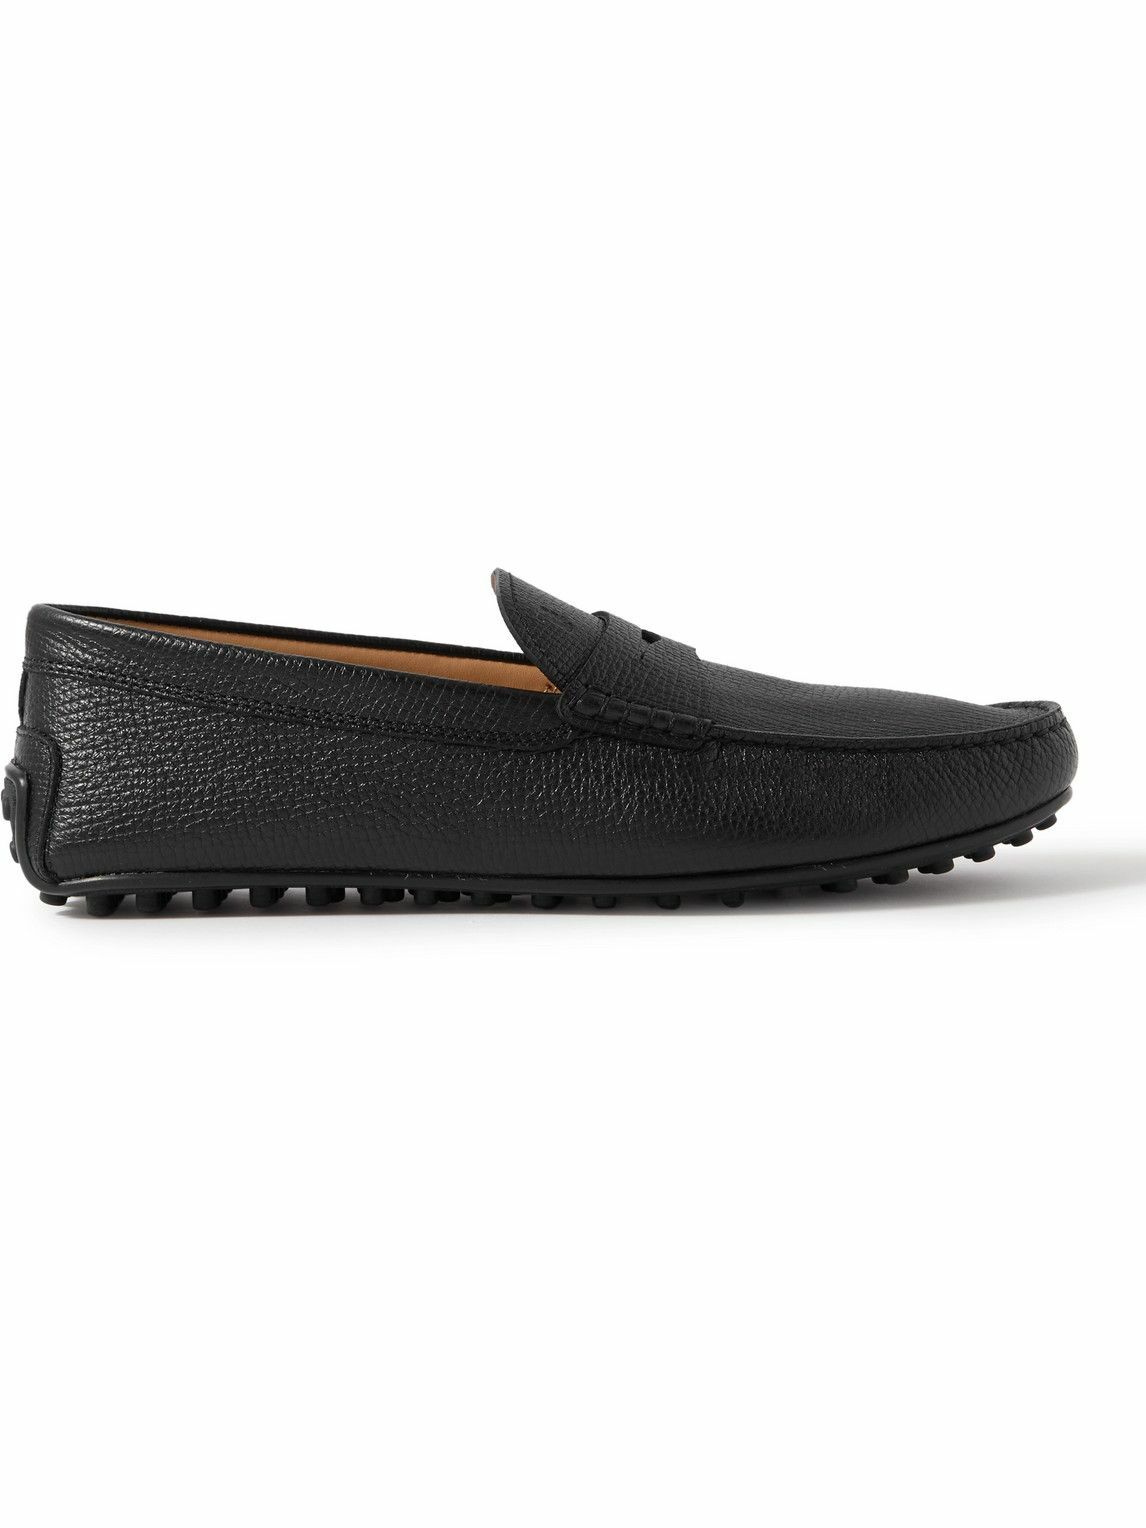 Tod's - City Gommino Cross-Grain Leather Penny Loafers - Black Tod's